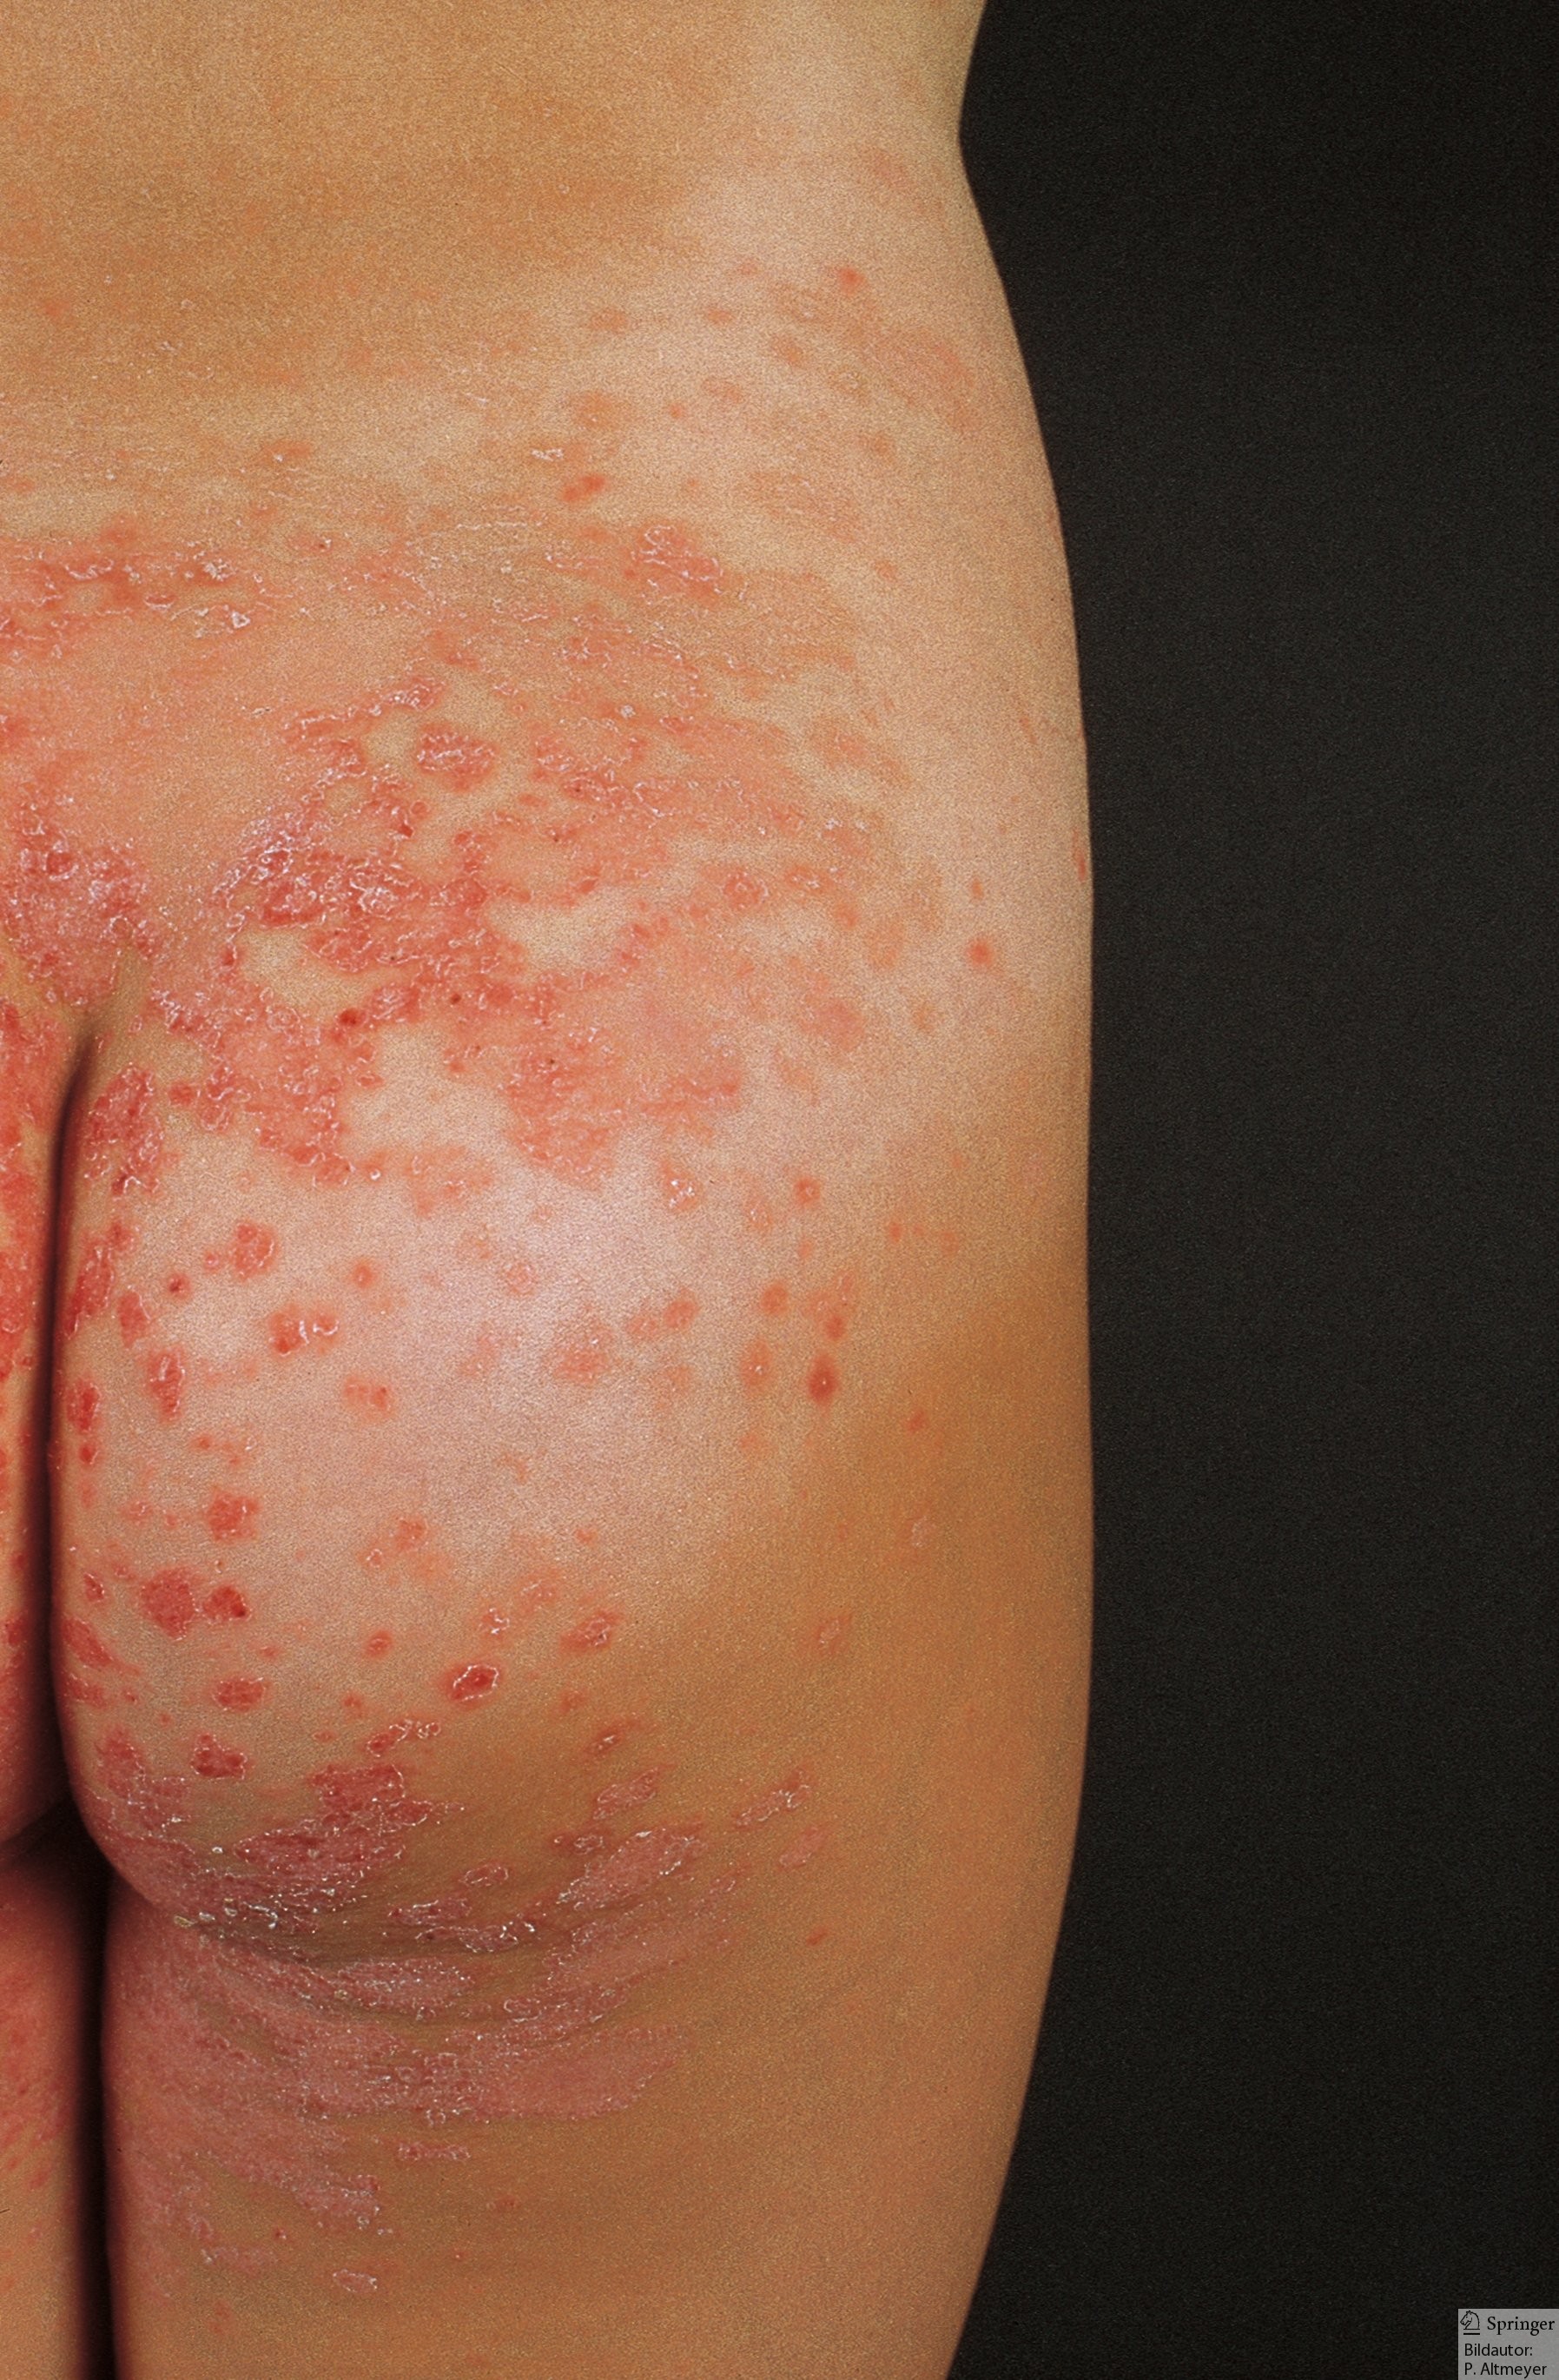 pityriasis rosea herpes - pictures, photos